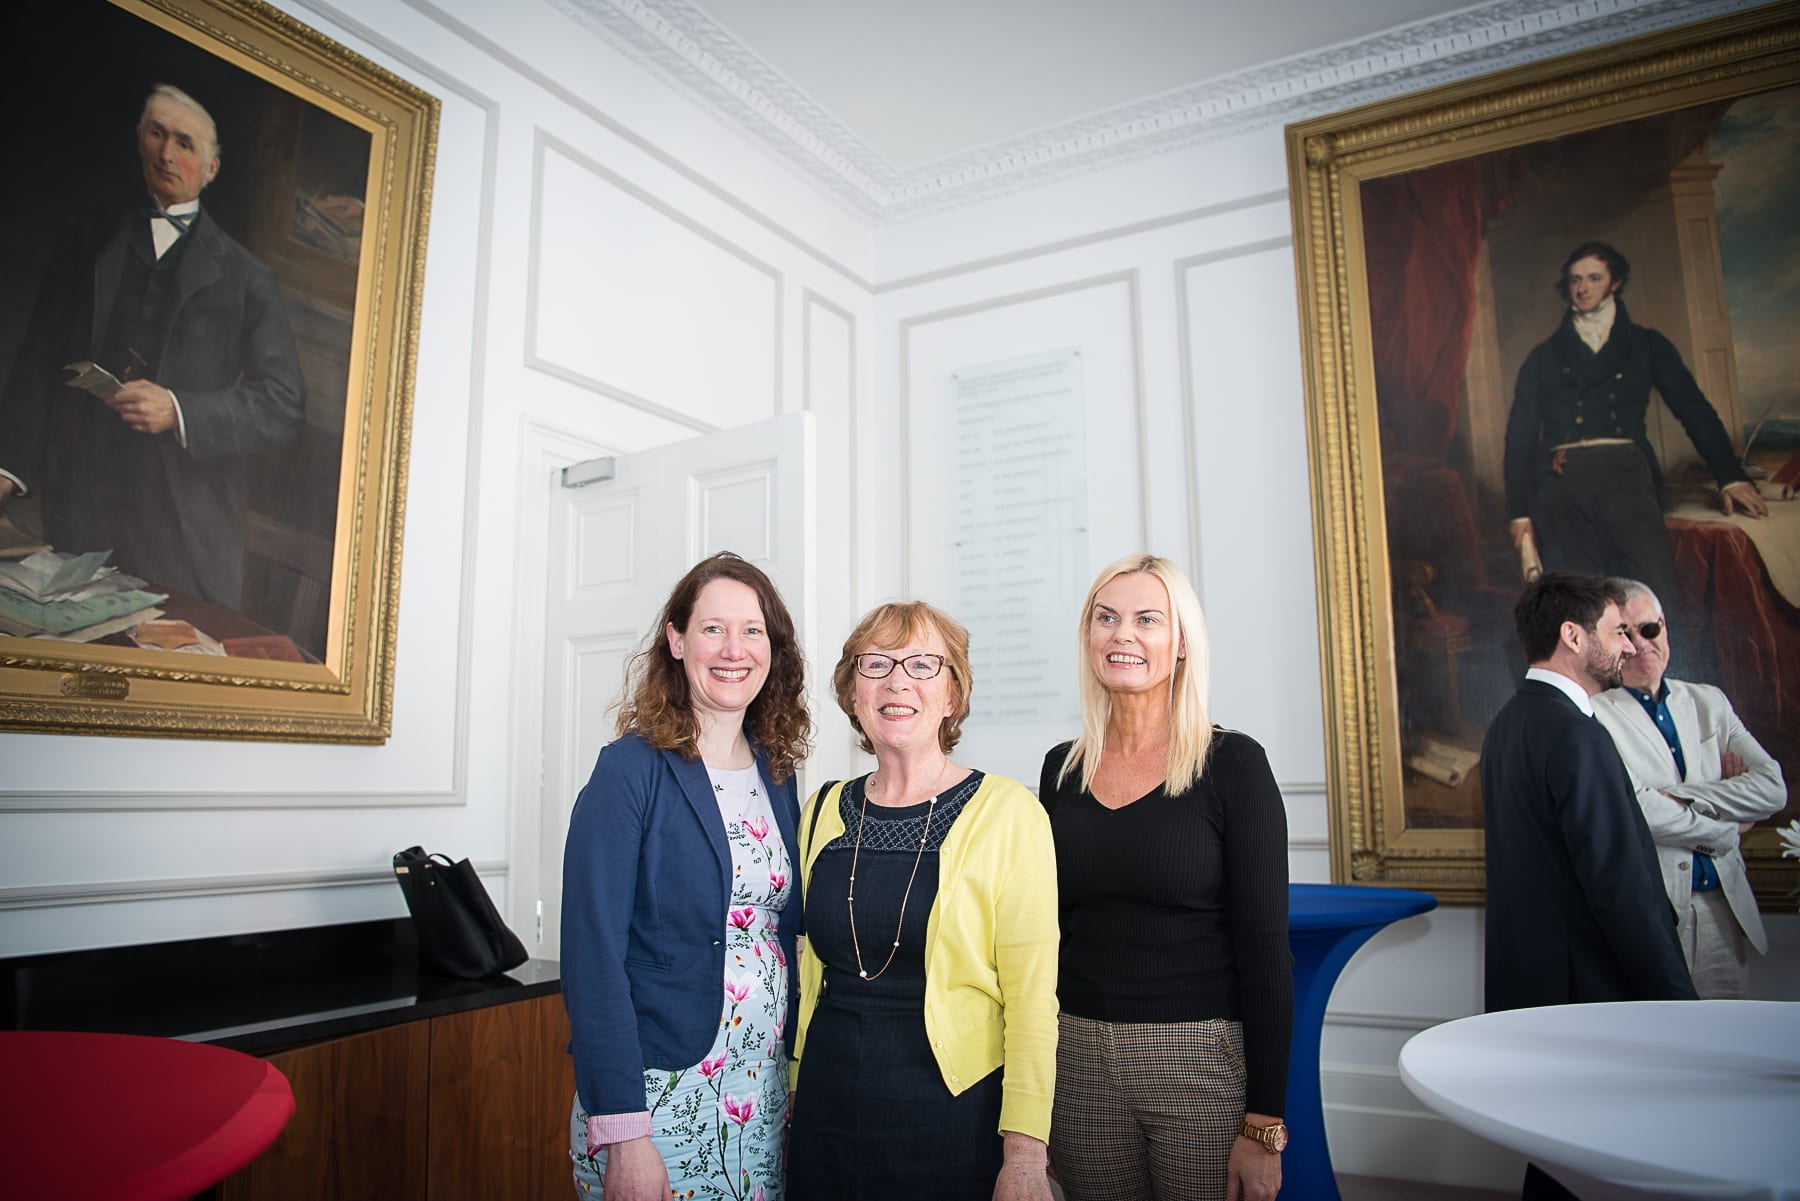 From Left to Right:  French Embassy Event which took place on the 18th June in the Limerick Chamber Boardroom:  Stephanie O’Riordan - UL, Nuala McGann -Alliance Française de Limerick,  Dawn Hackett - Alliance Française de Limerick 
Photo by Morning Star Photography